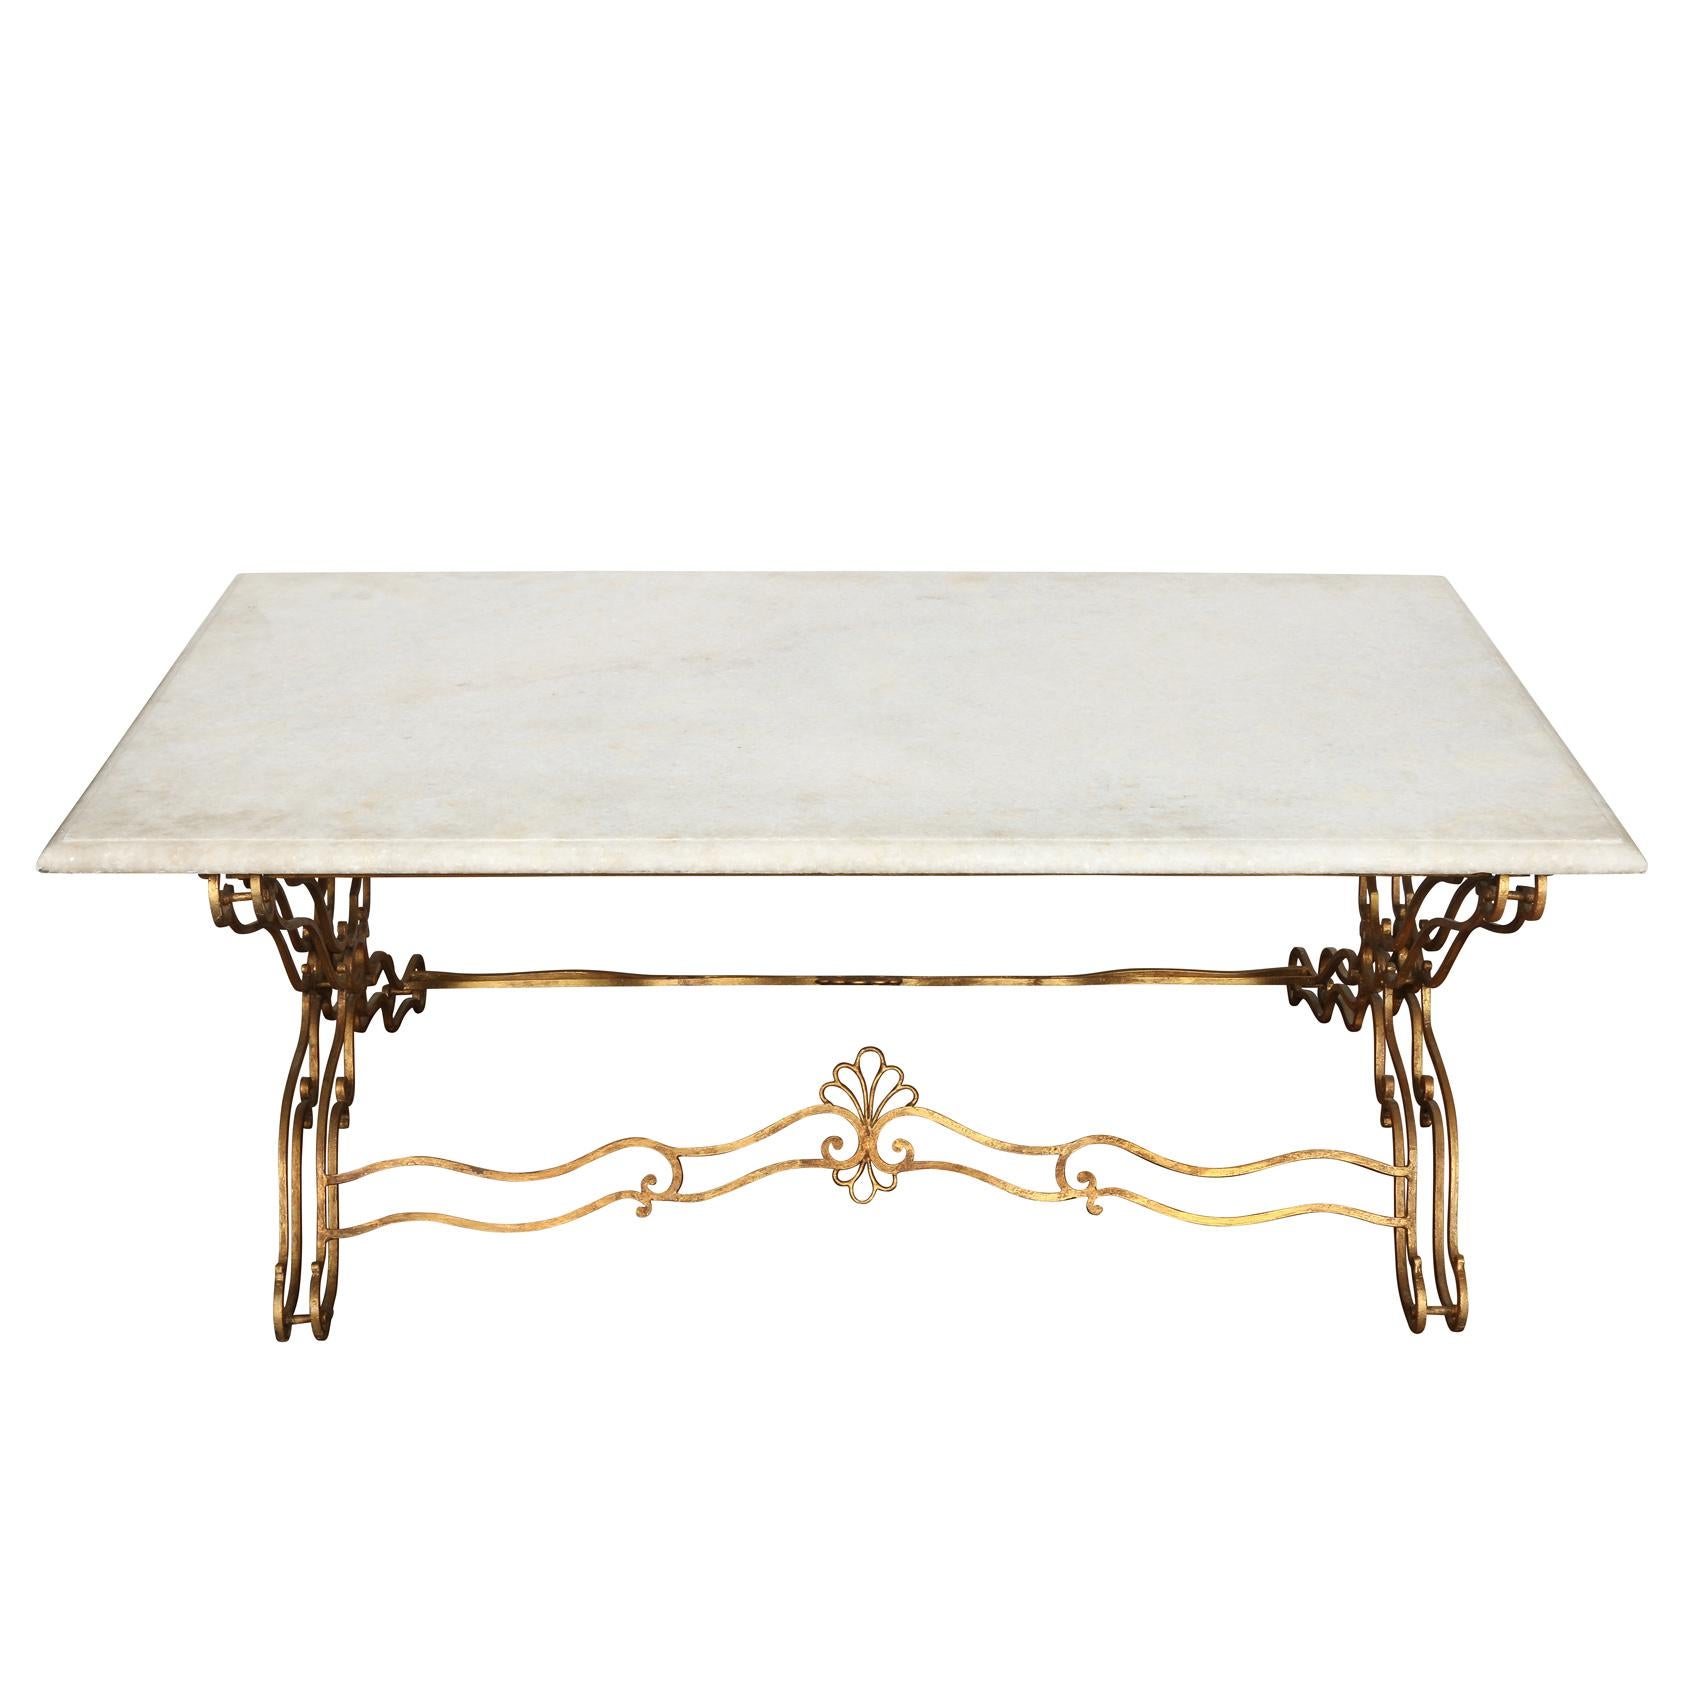 Jansen style, intricately curved gilt metal X-base white marble top coffee table.